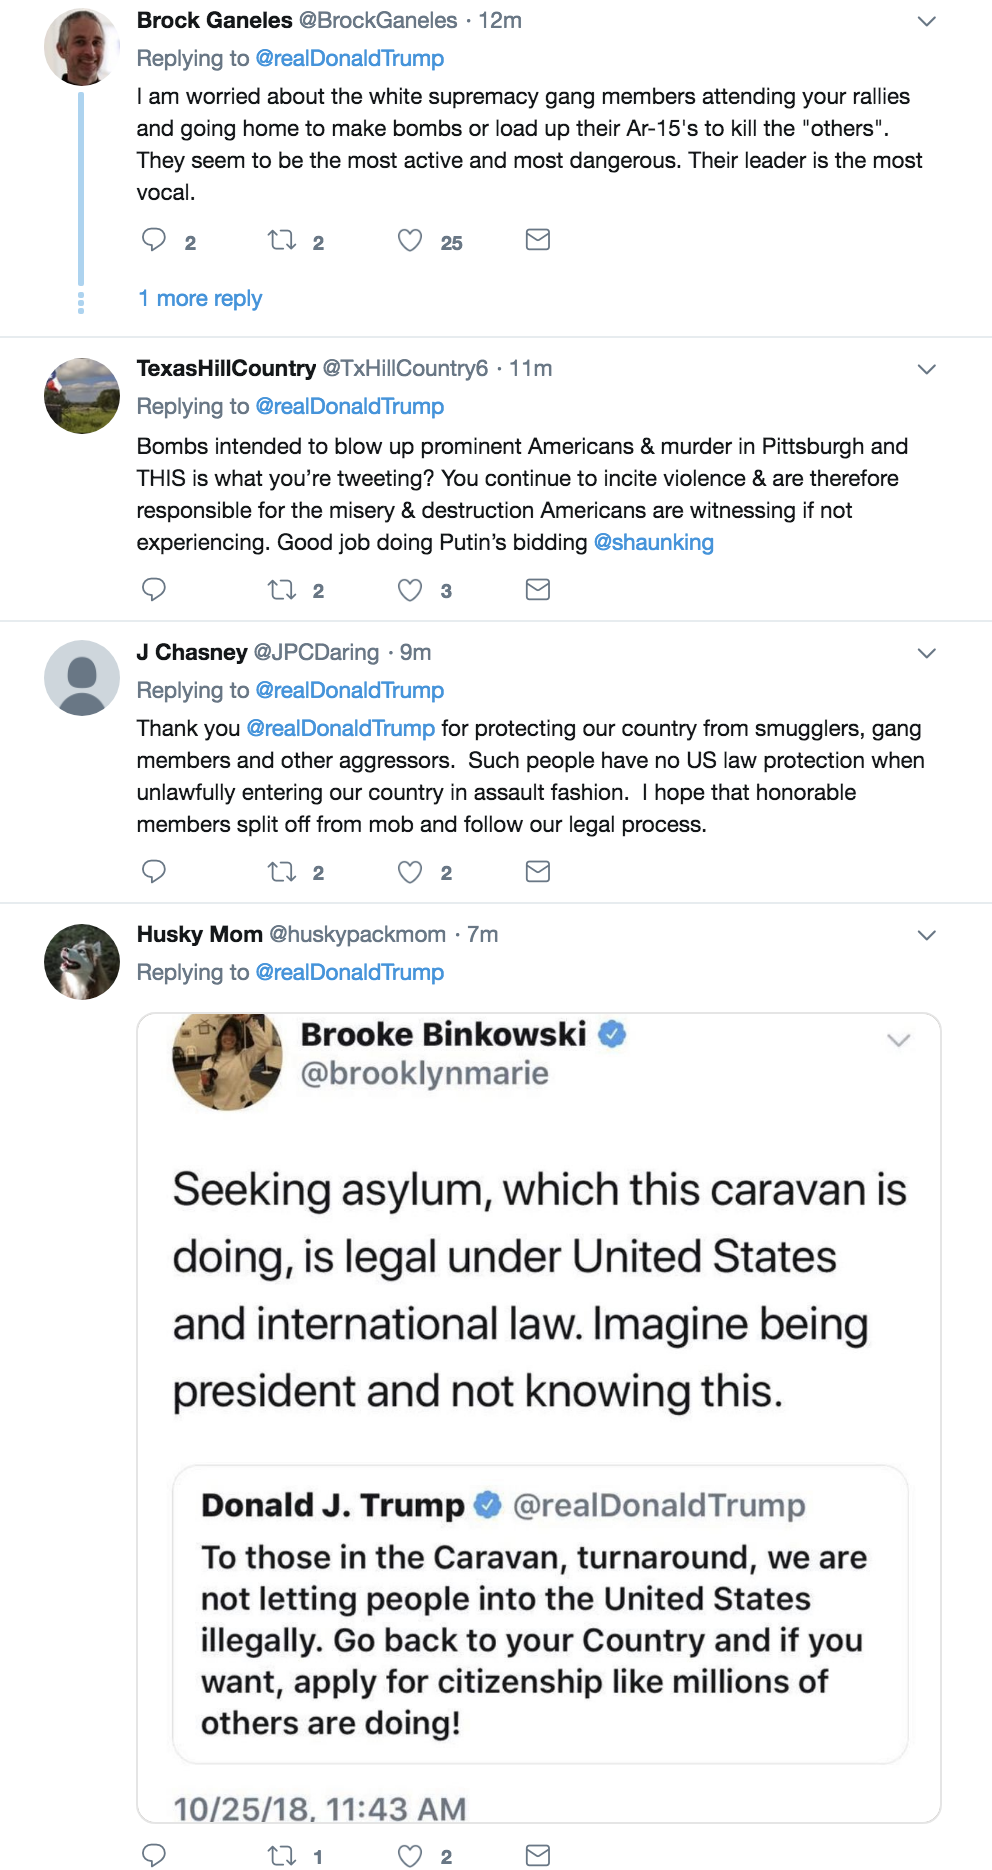 Screen-Shot-2018-10-29-at-10.09.53-AM Trump Tries To Scare The Nation With Terrifying Immigrant Caravan Fables Corruption Donald Trump Immigration Politics Racism Top Stories 